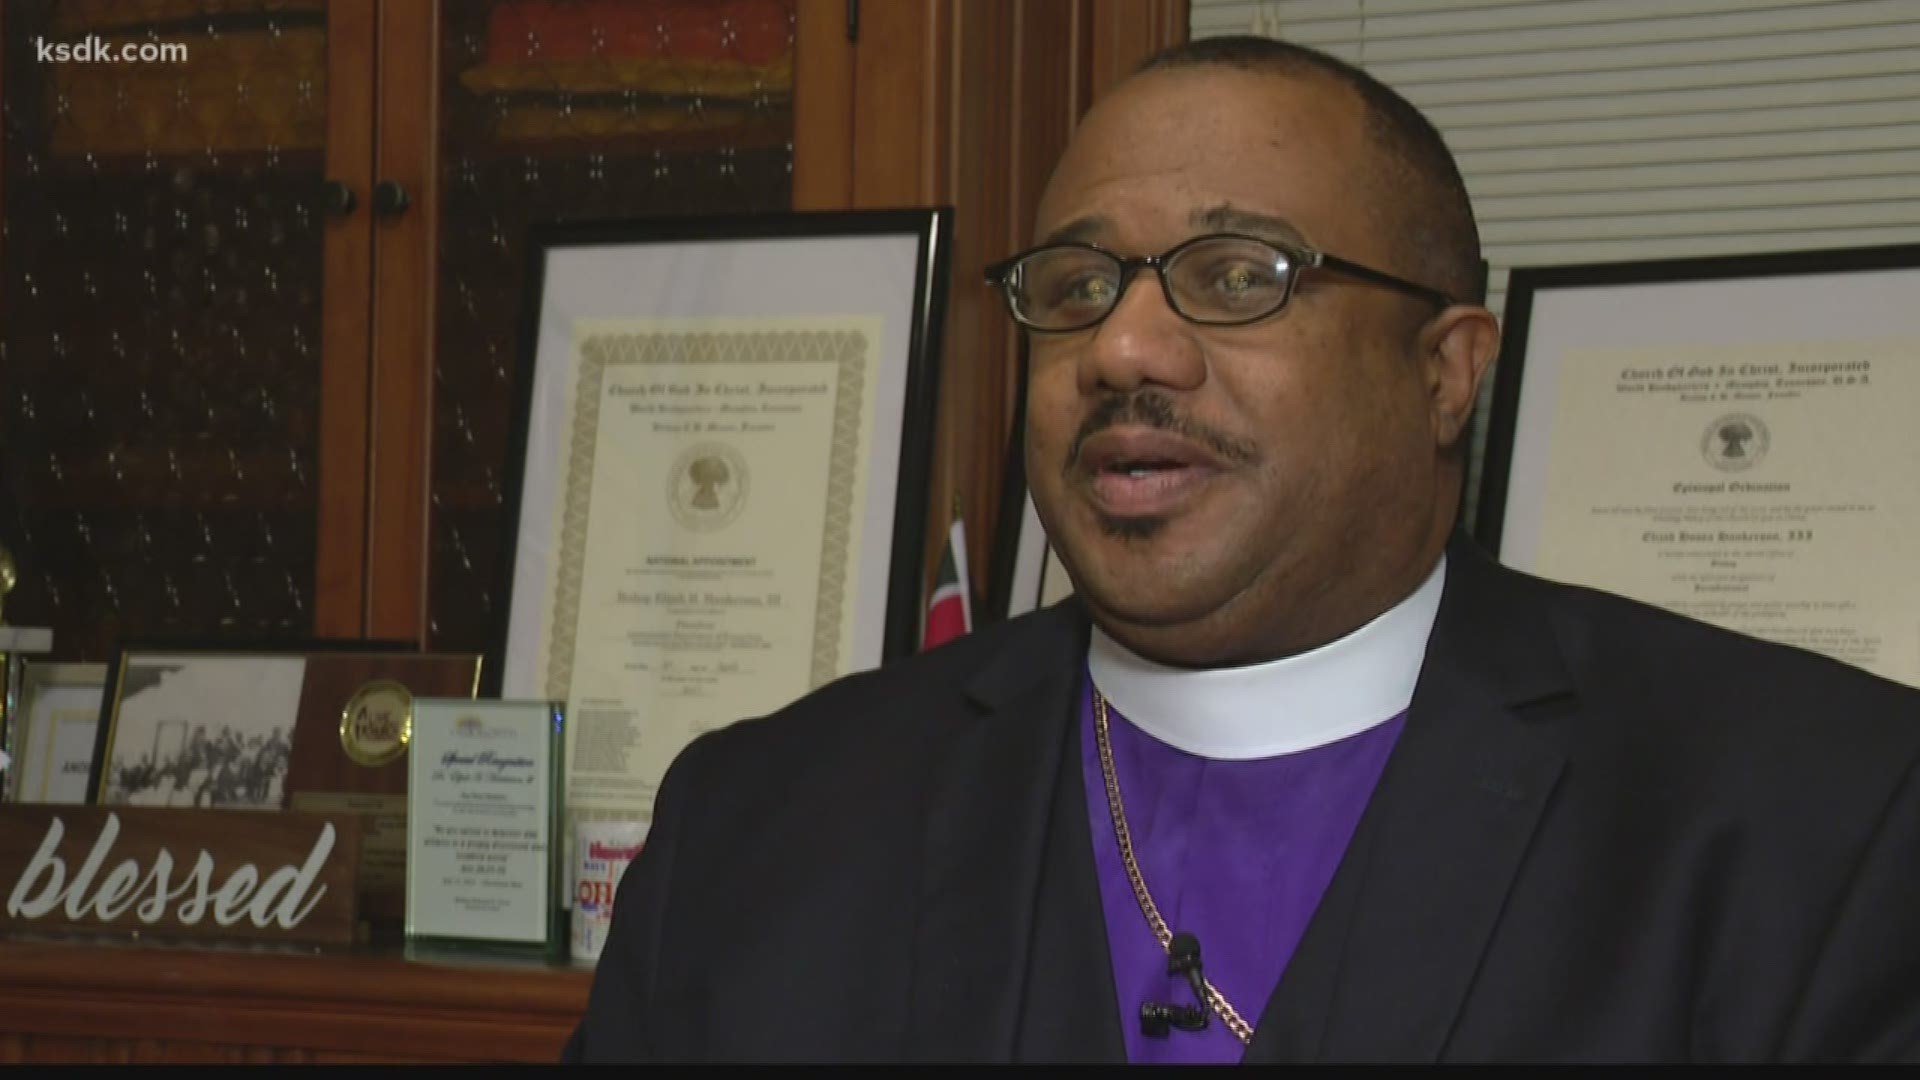 St. Louis clergy helps recruit police